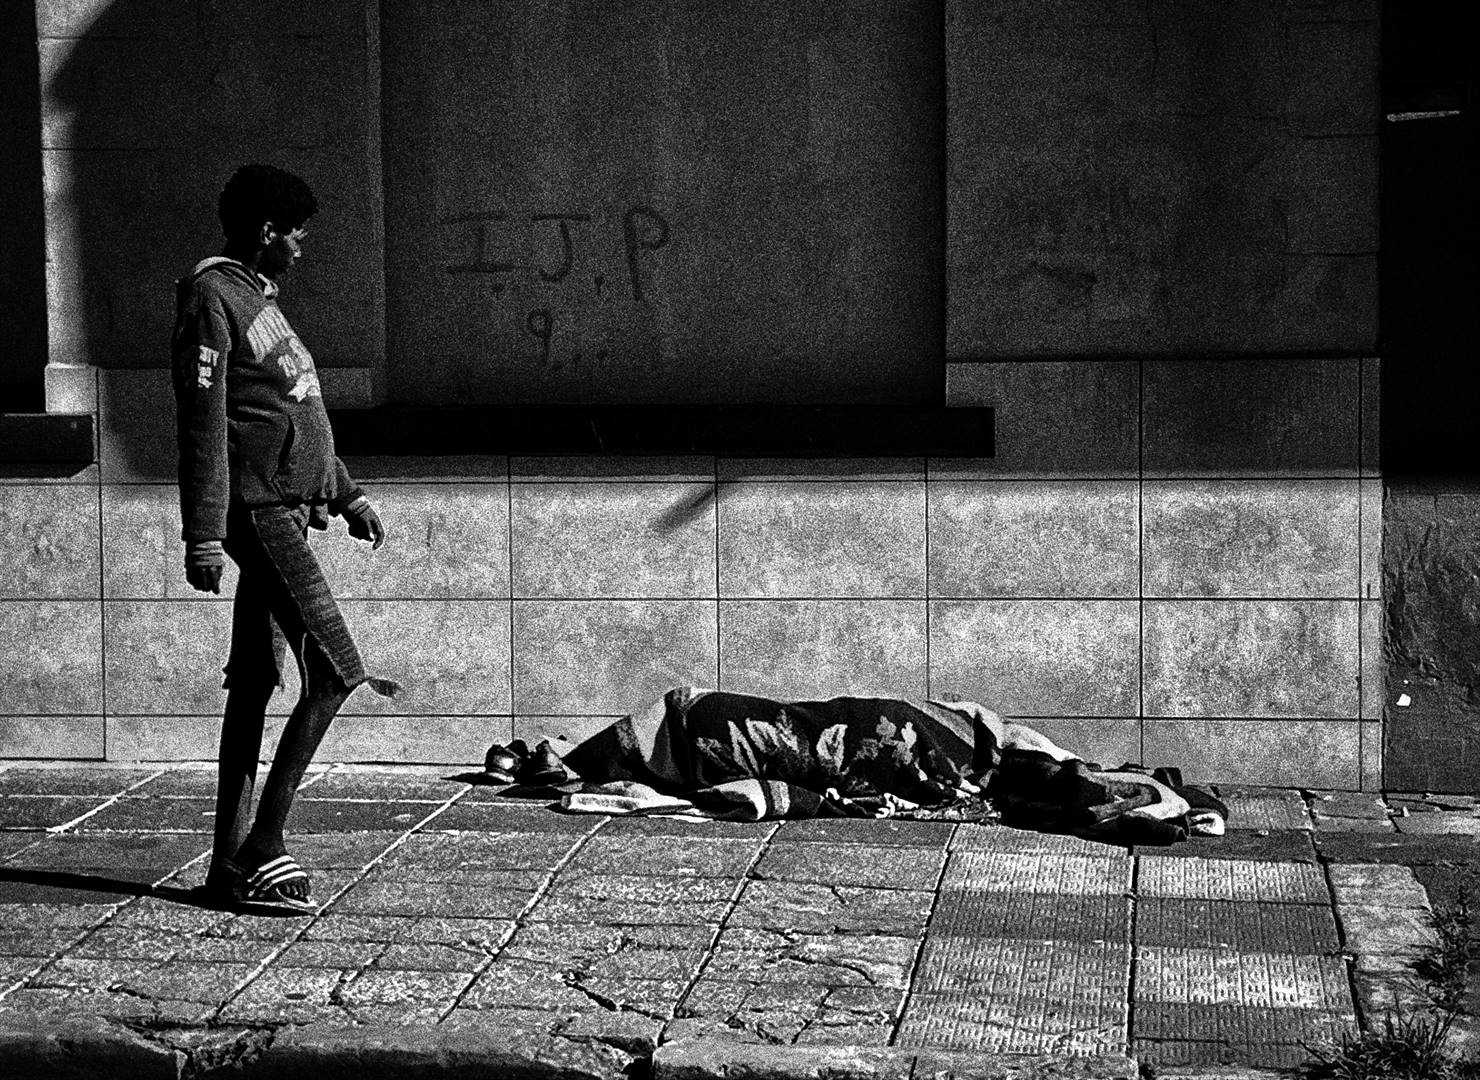 A woman looks at another person asleep on a pavement in downtown Johannesburg